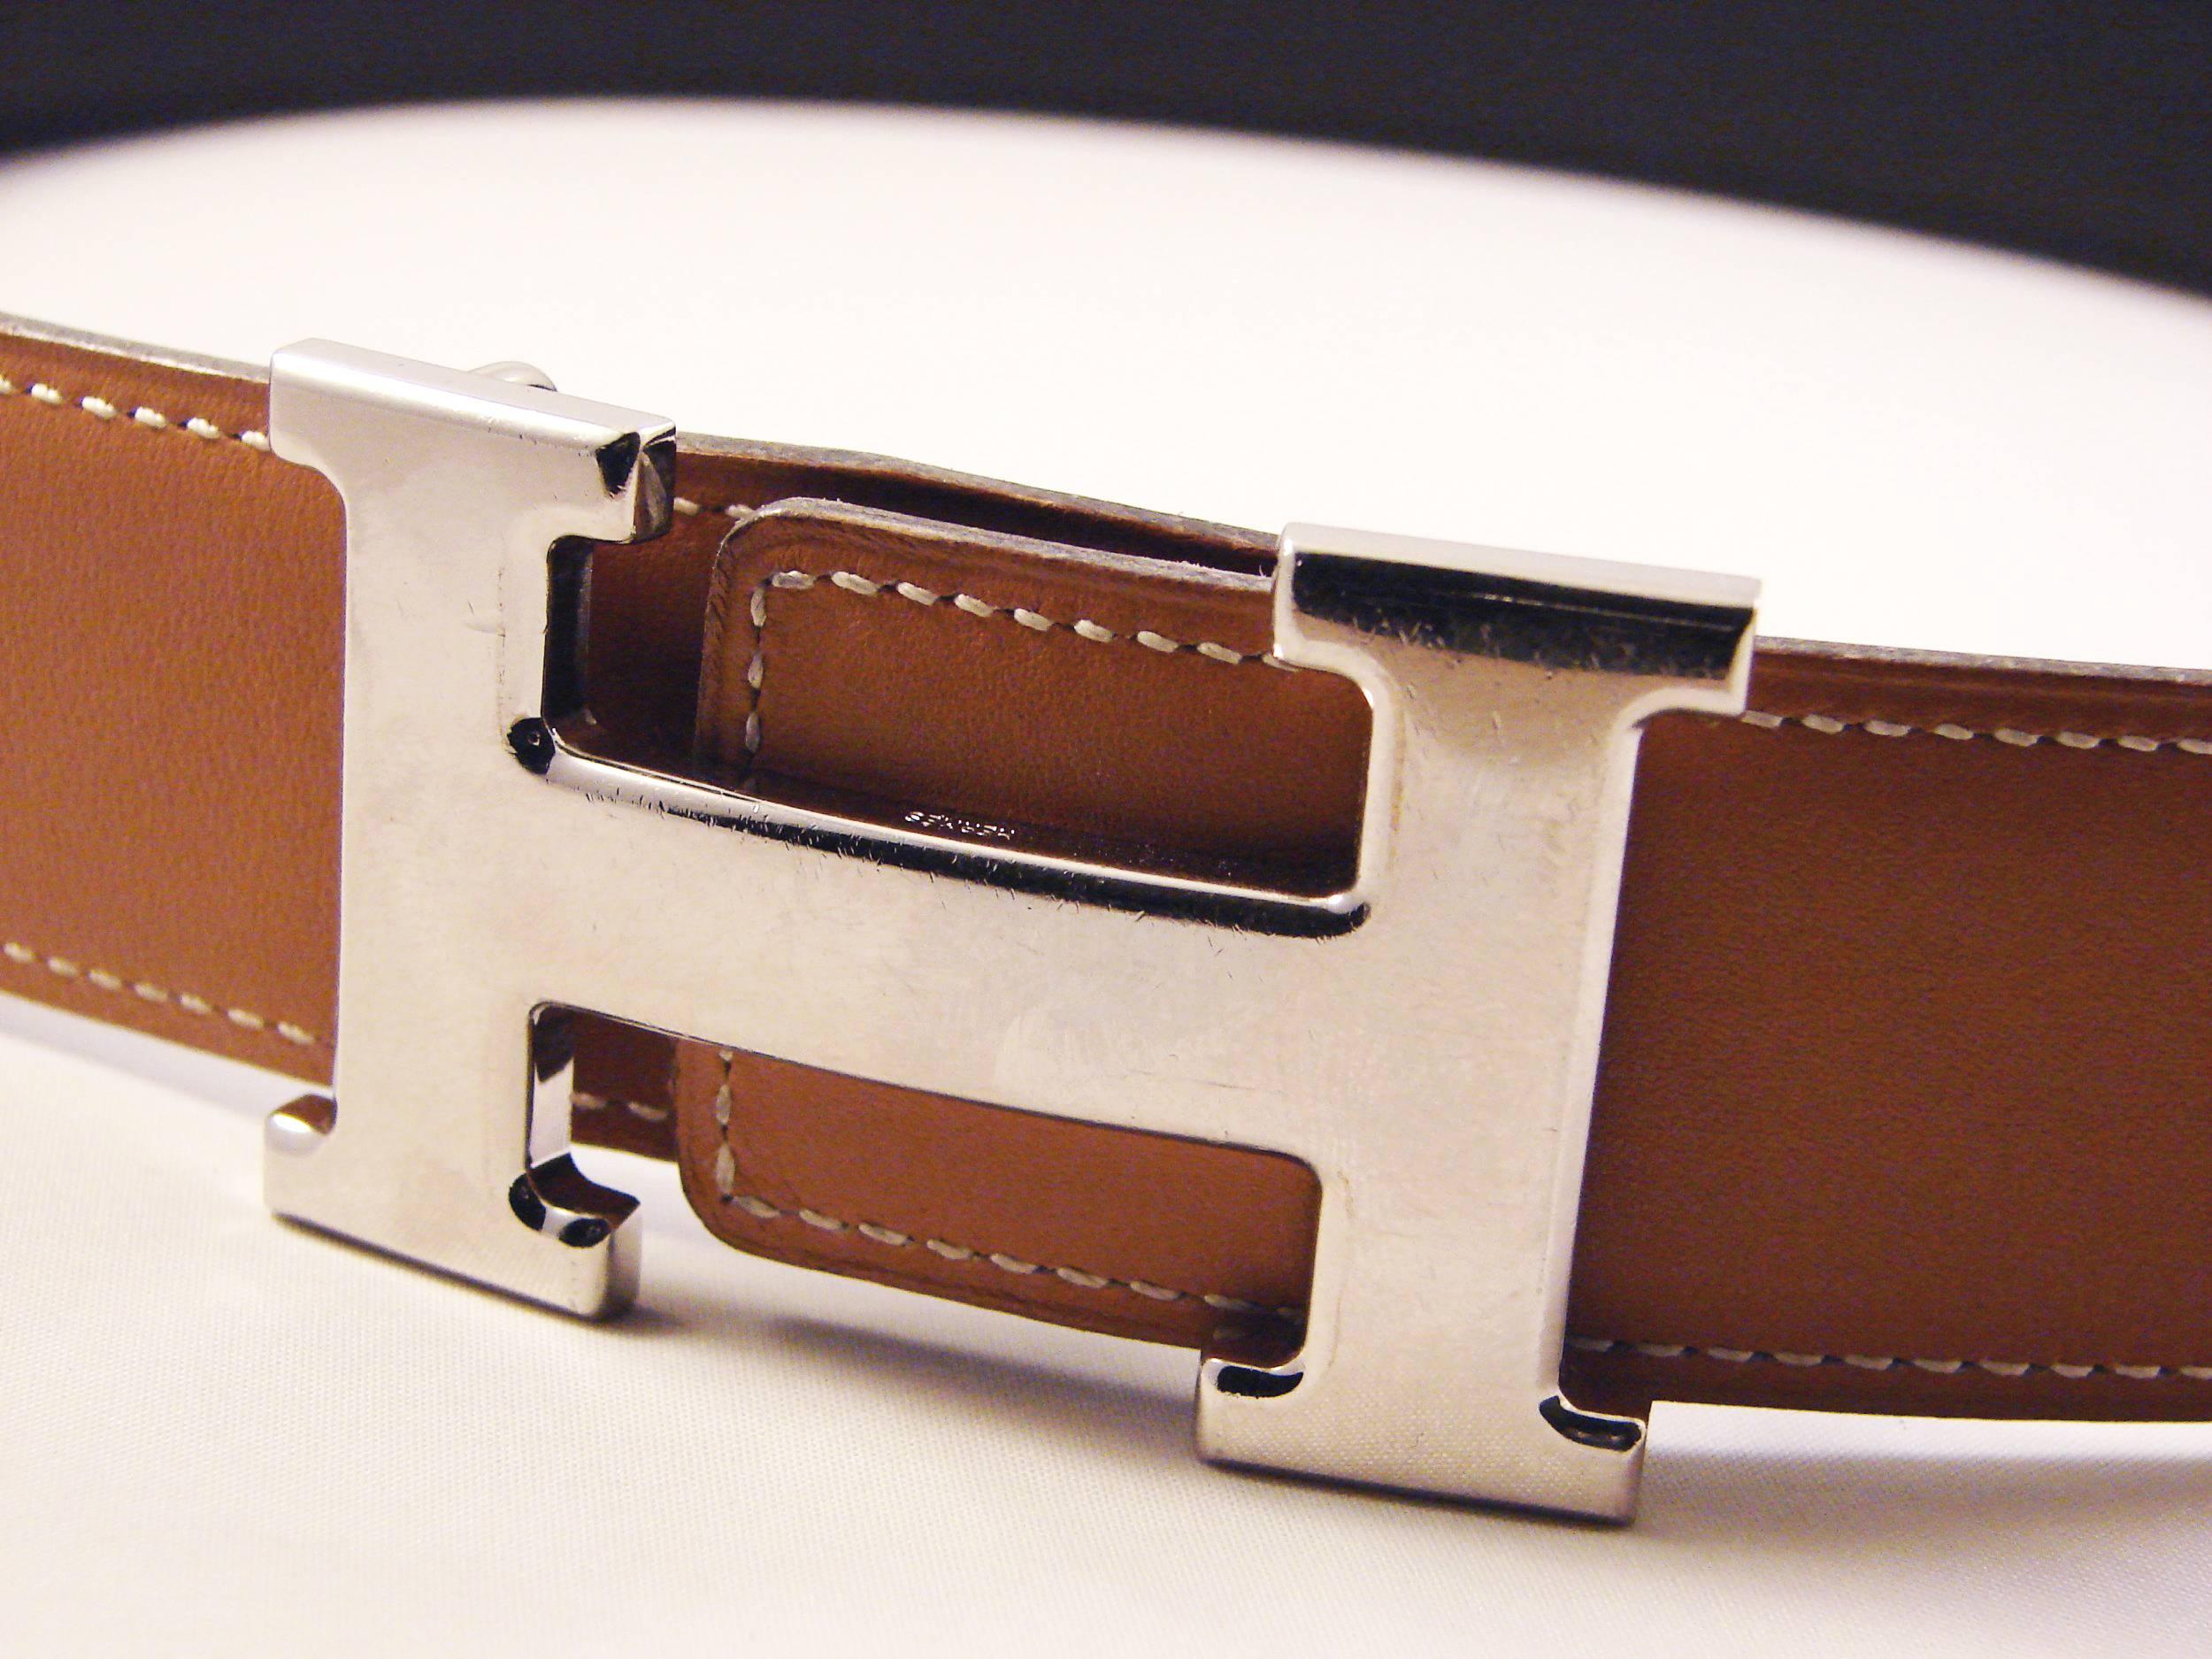 Iconic Hermes 'Constance' buckle in silver comes with a Vache leather belt strap thats reversible between Natural and Noir.  In very good condition, with minor surface scratches to the silver on the buckle and the strap shows some minor surface